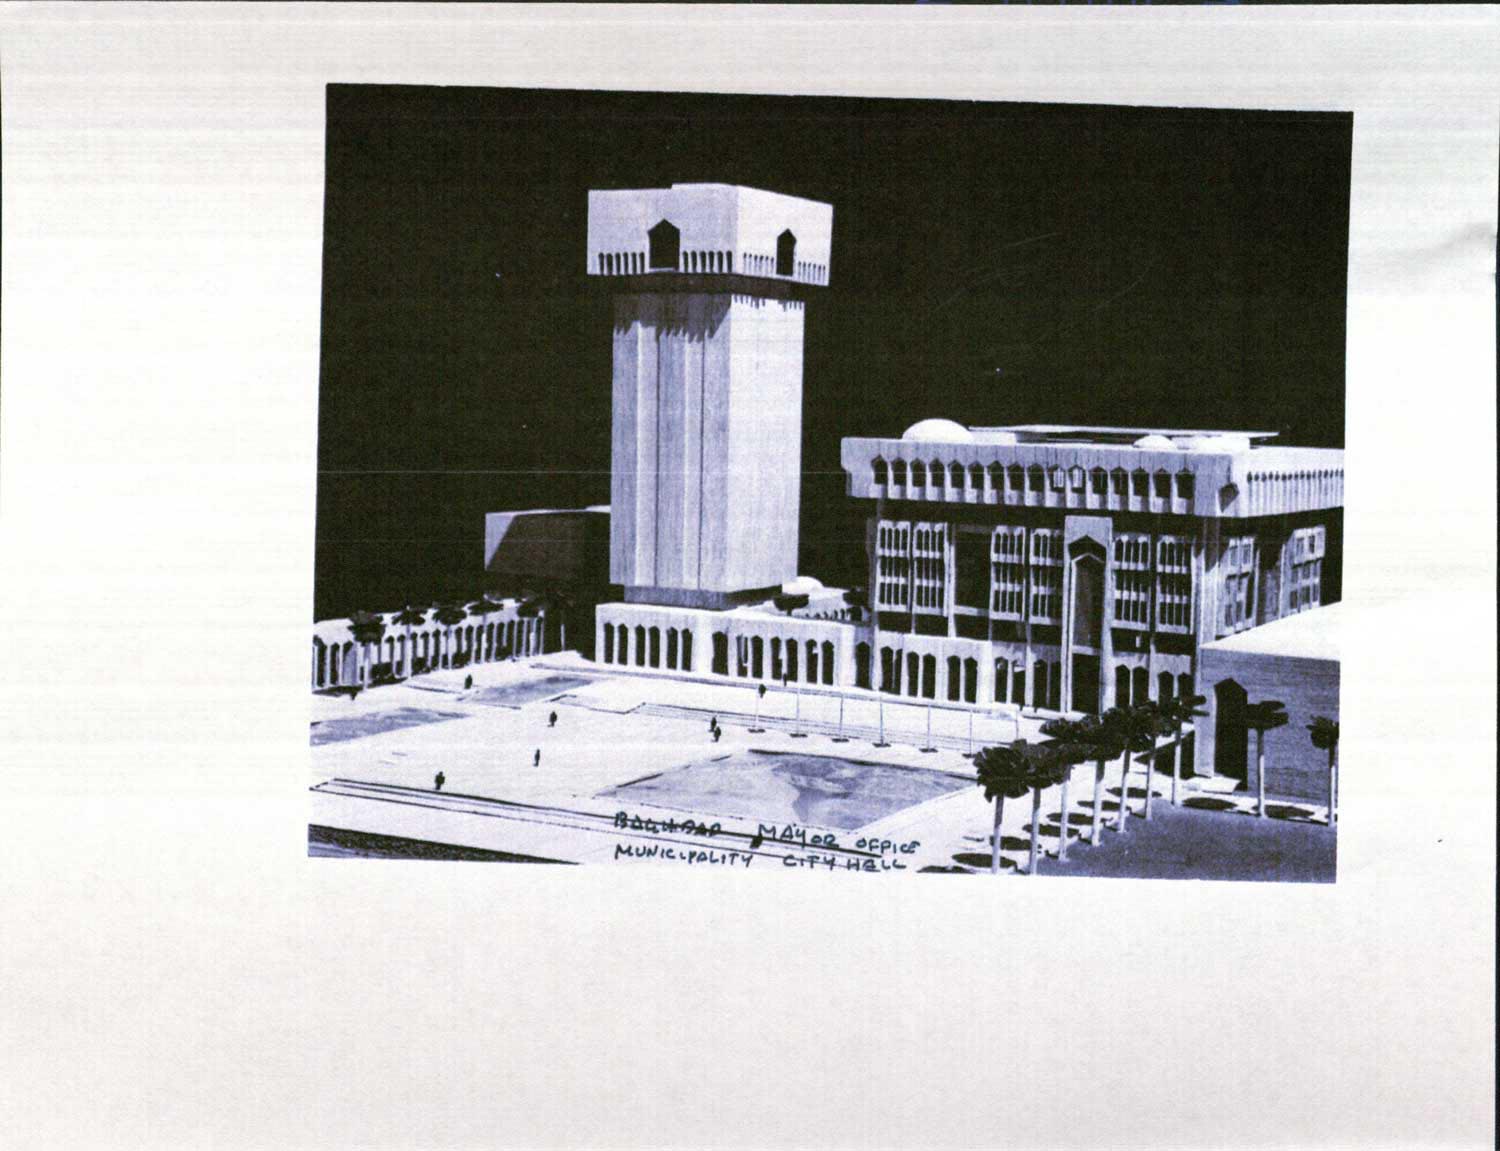 Reproduction of a black and white photograph of the model for the Baghdad Civic Center. The Mayor's Office can be seen on the right side of the photograph.